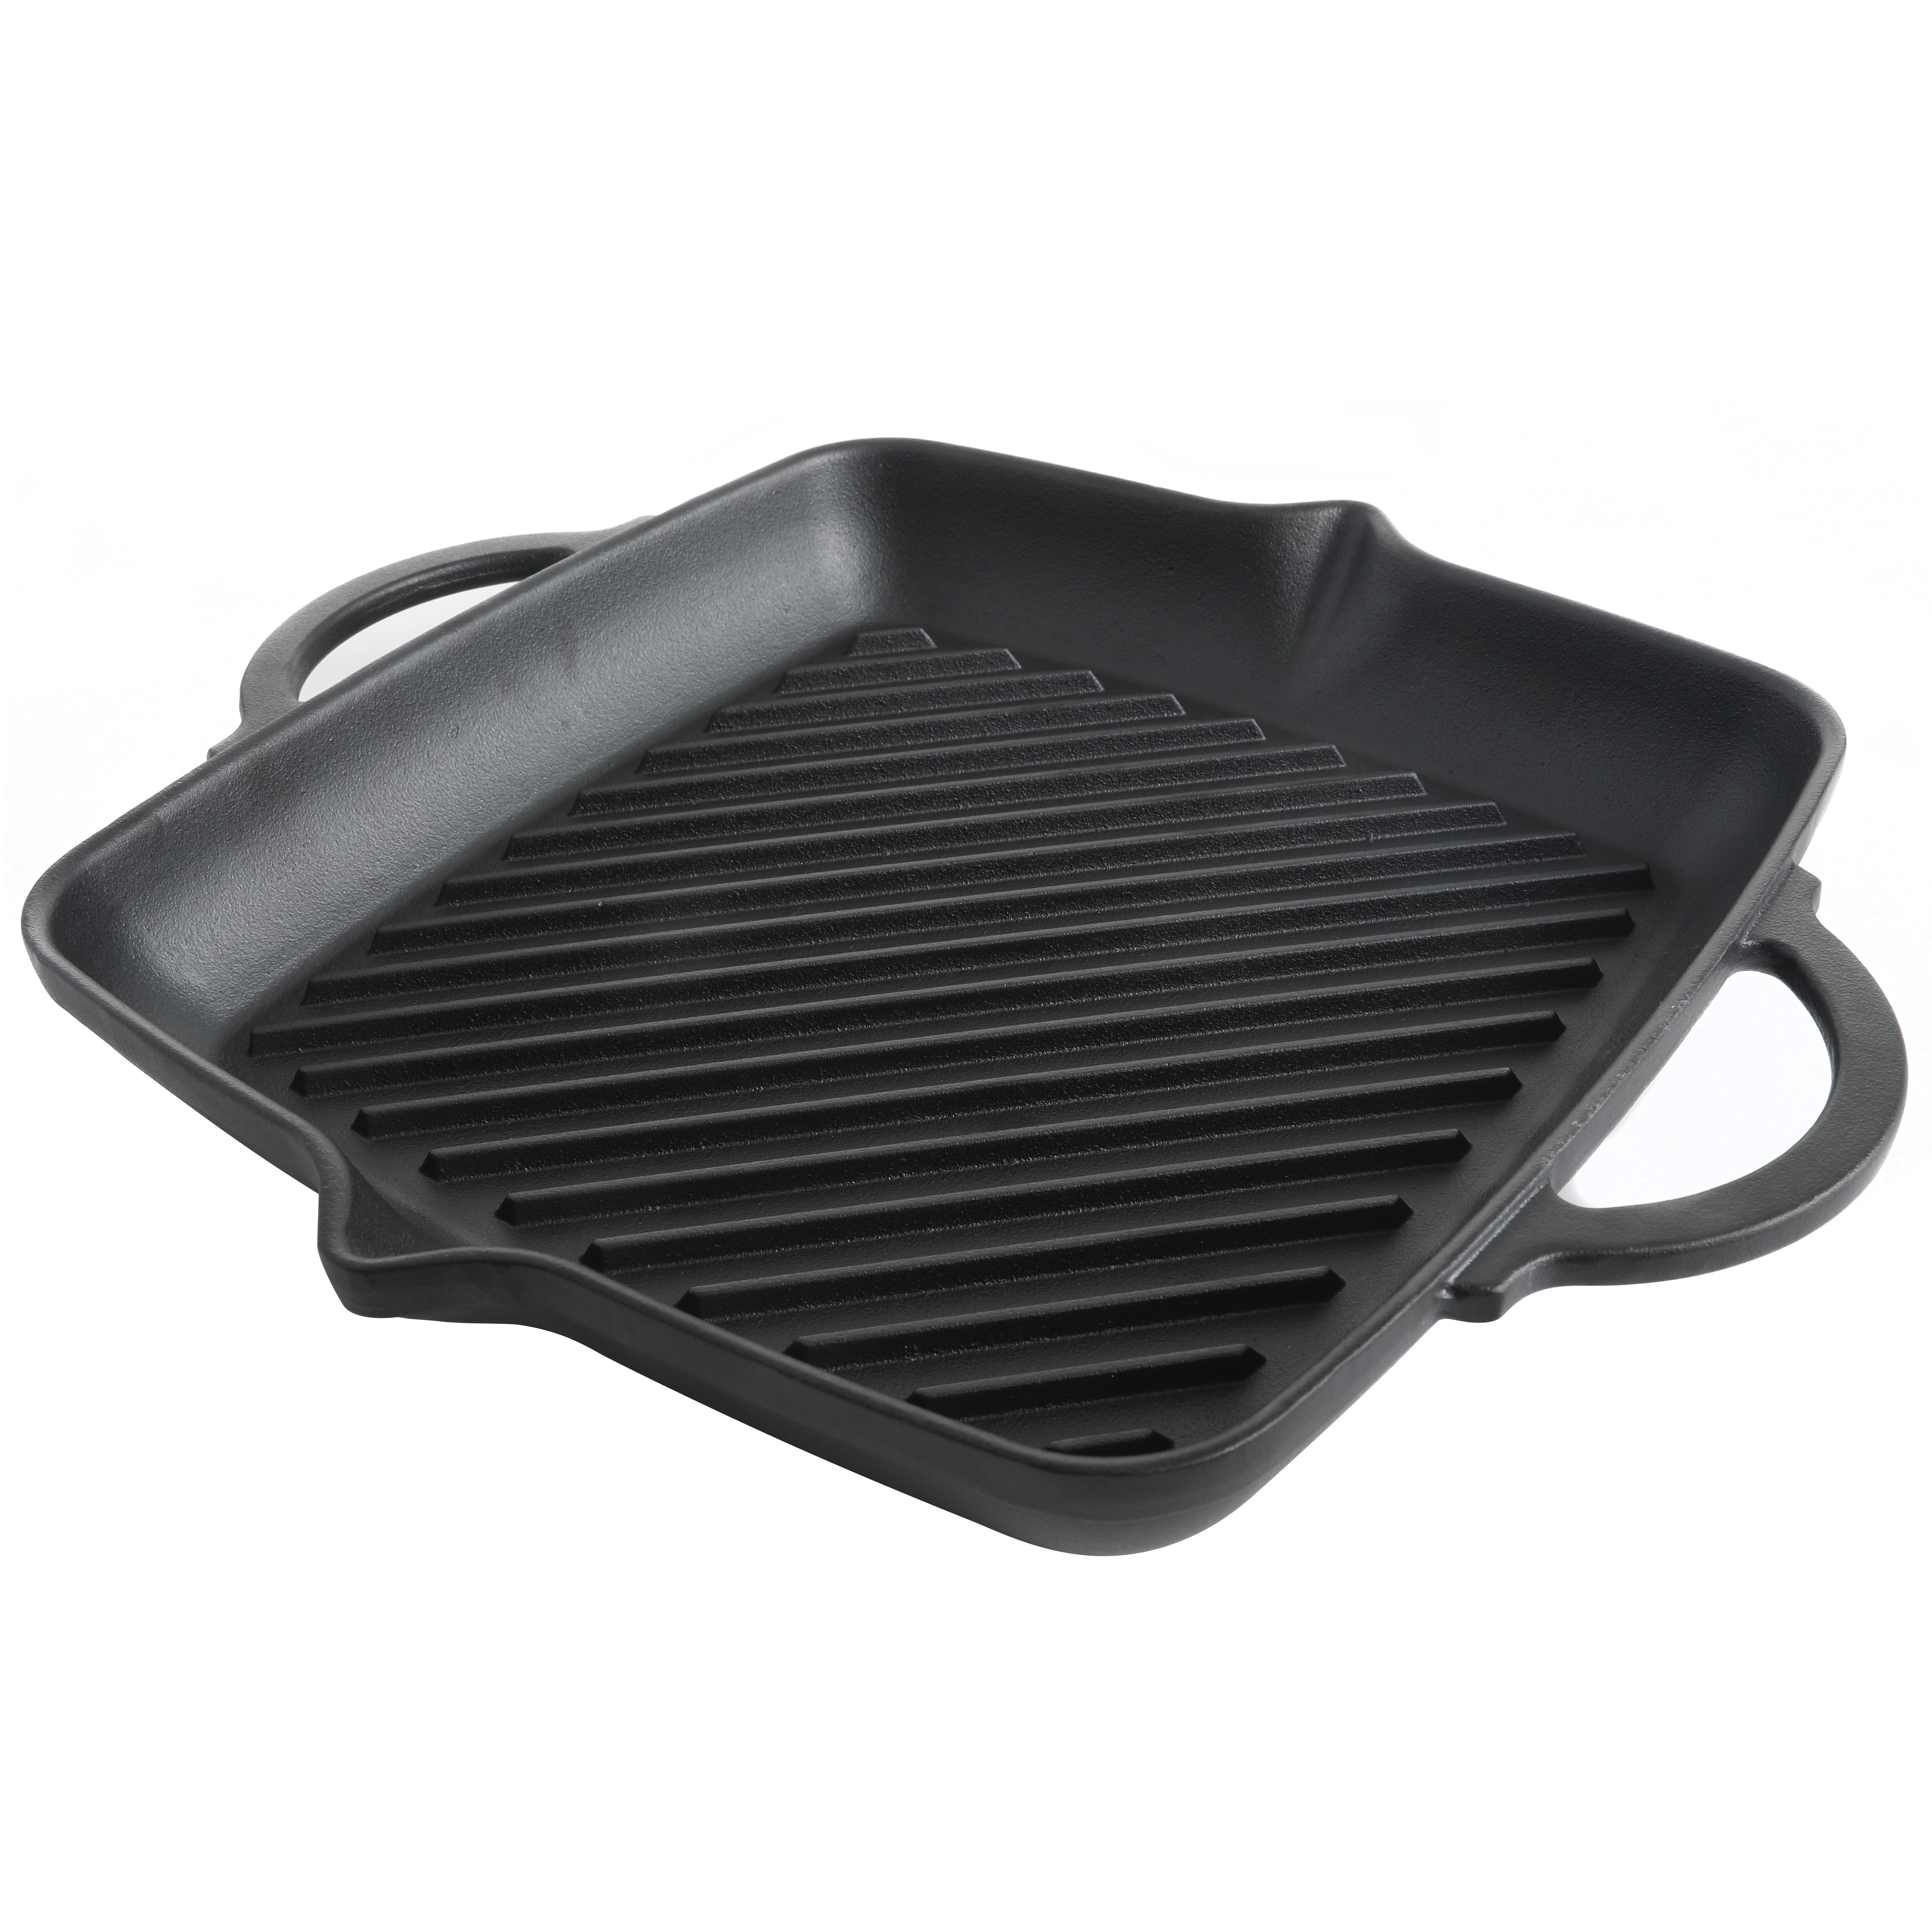 New Pioneer Woman Red 11”Non Stick Griddle Grill Pan Speckled